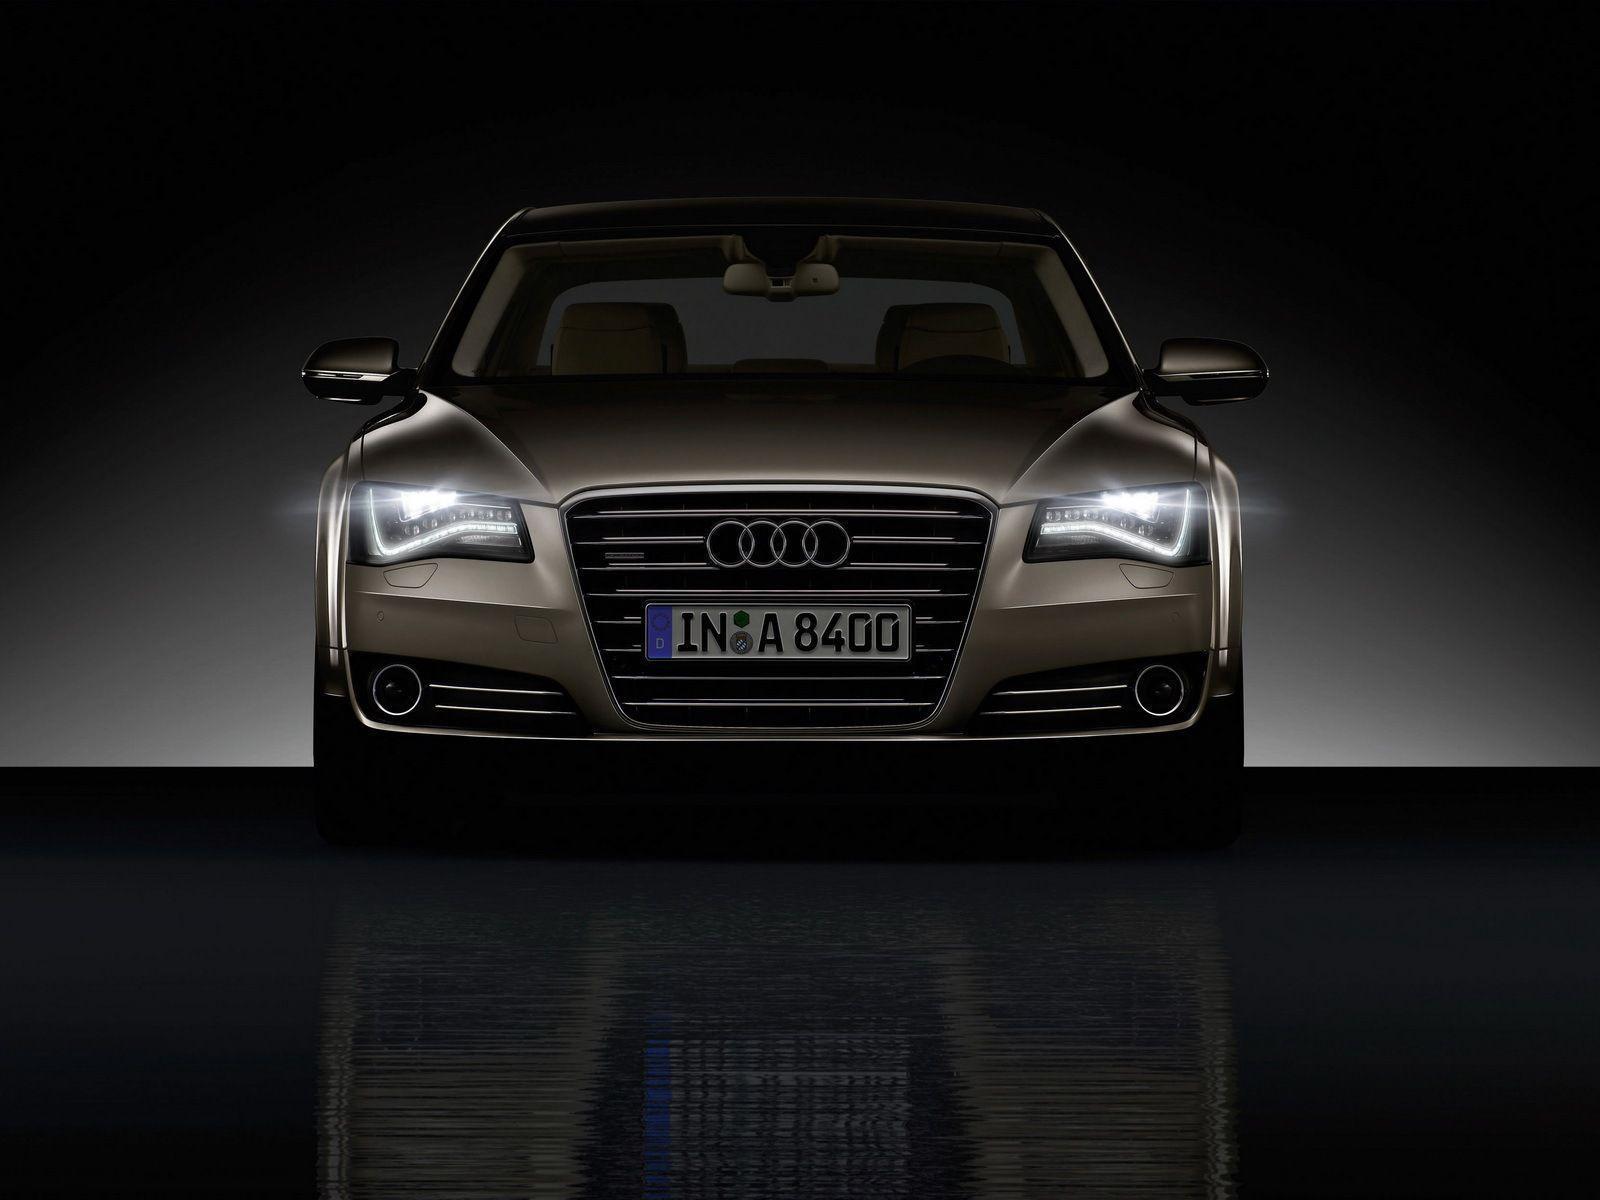 Car design Audi a8 wallpaper and image, picture